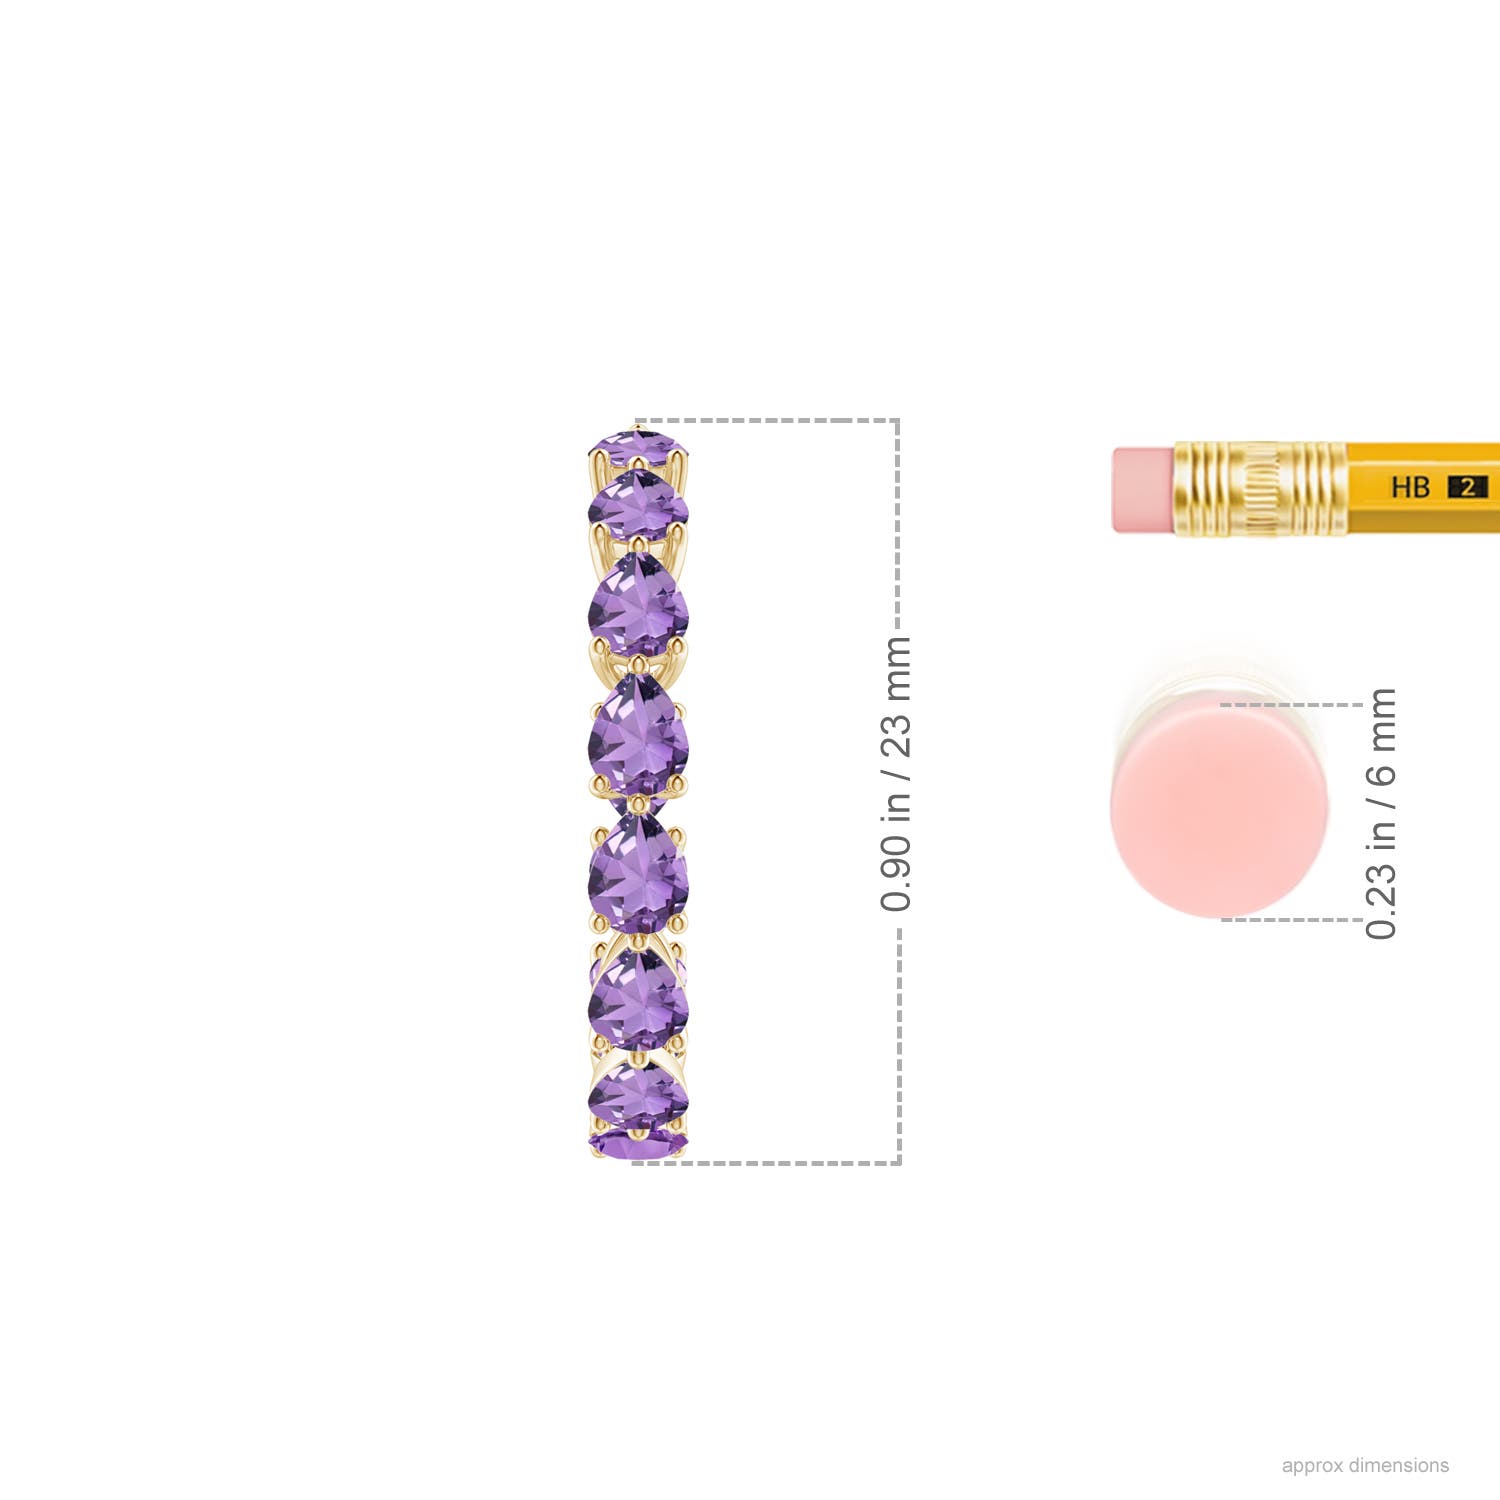 A - Amethyst / 3.12 CT / 14 KT Yellow Gold